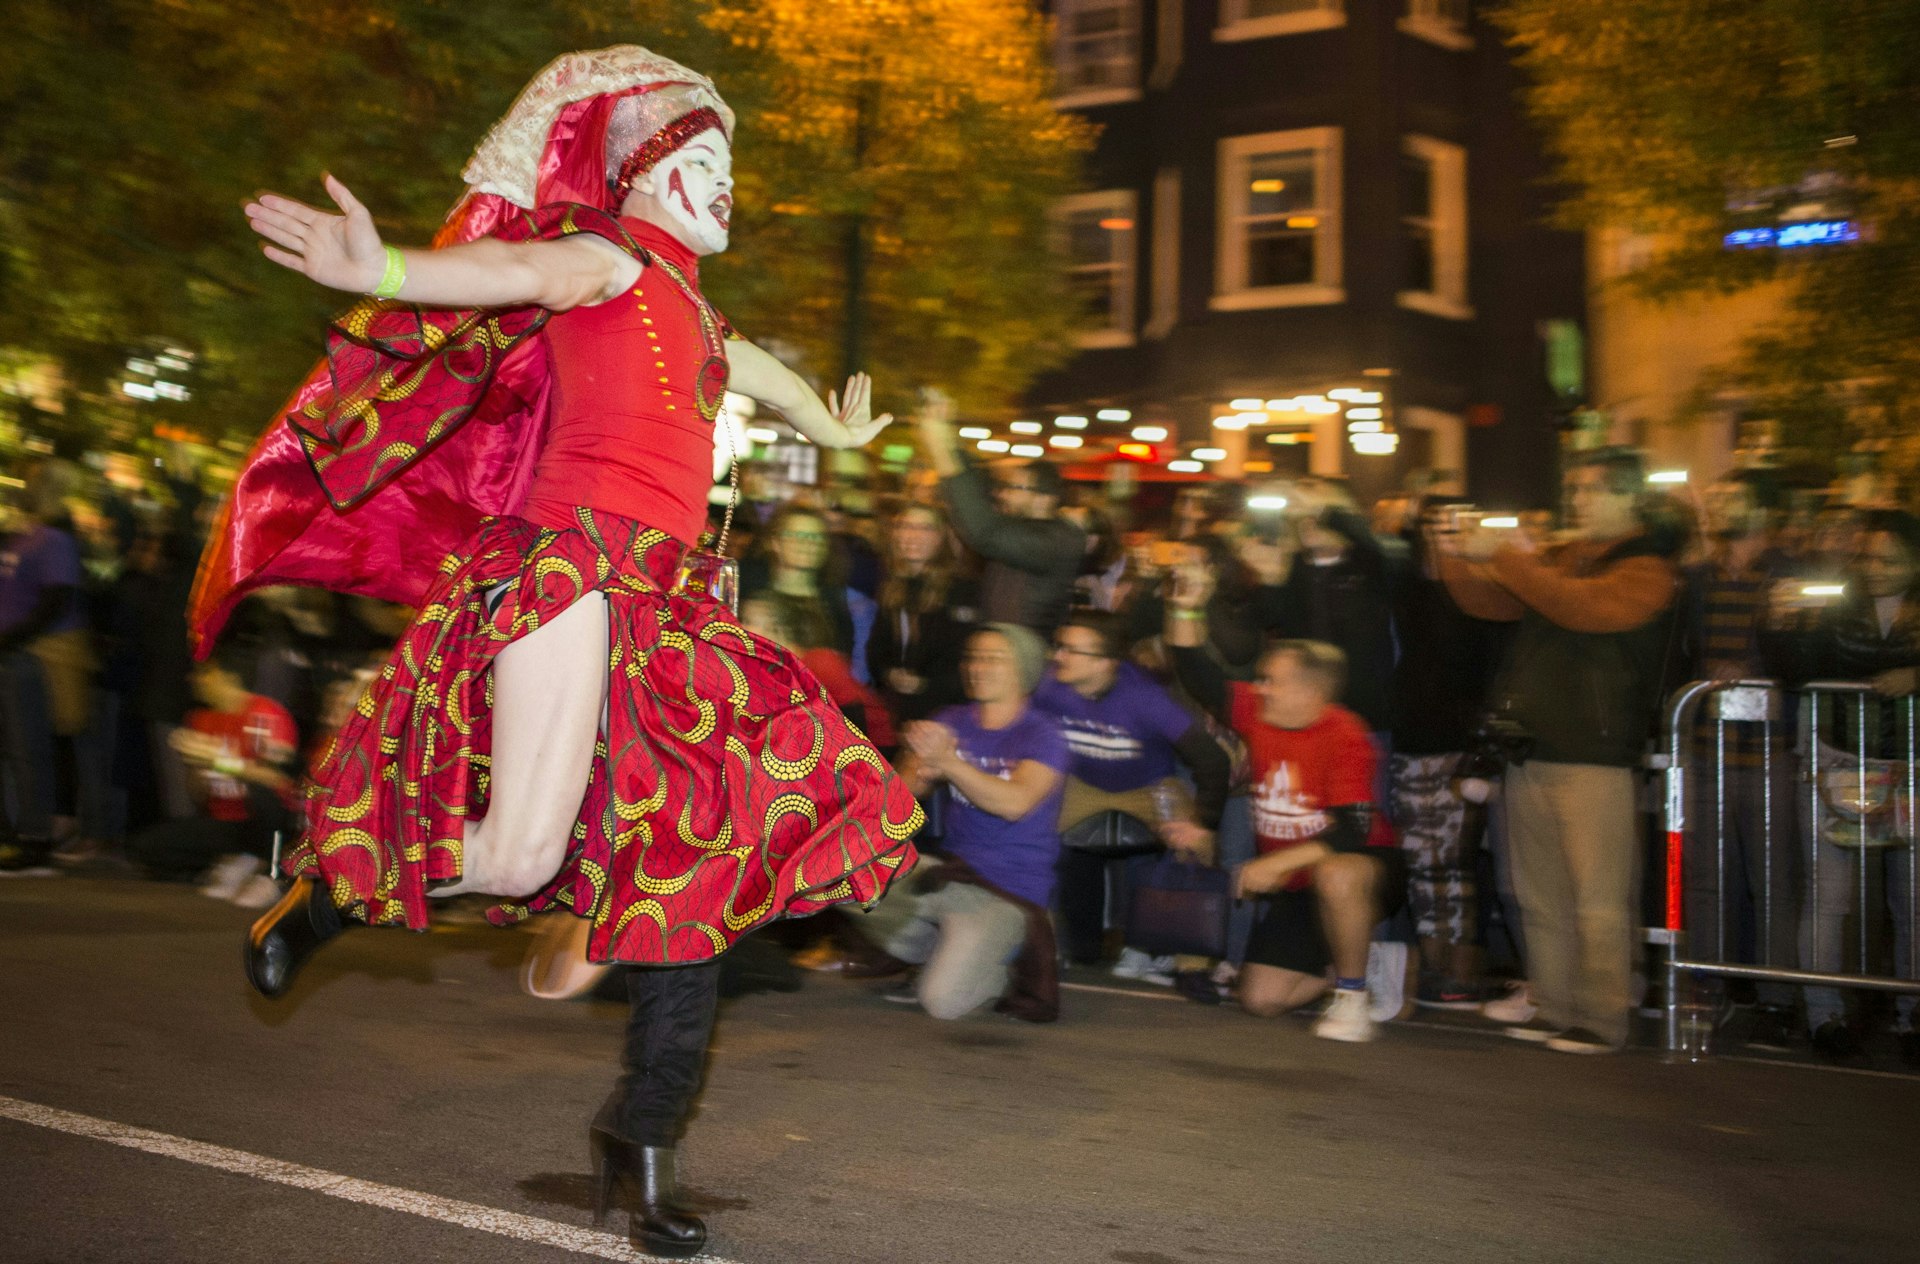 A person dressed in drag runs to the finish line during the annual High Heel Drag Race near Dupont Circle in Washington, DC.